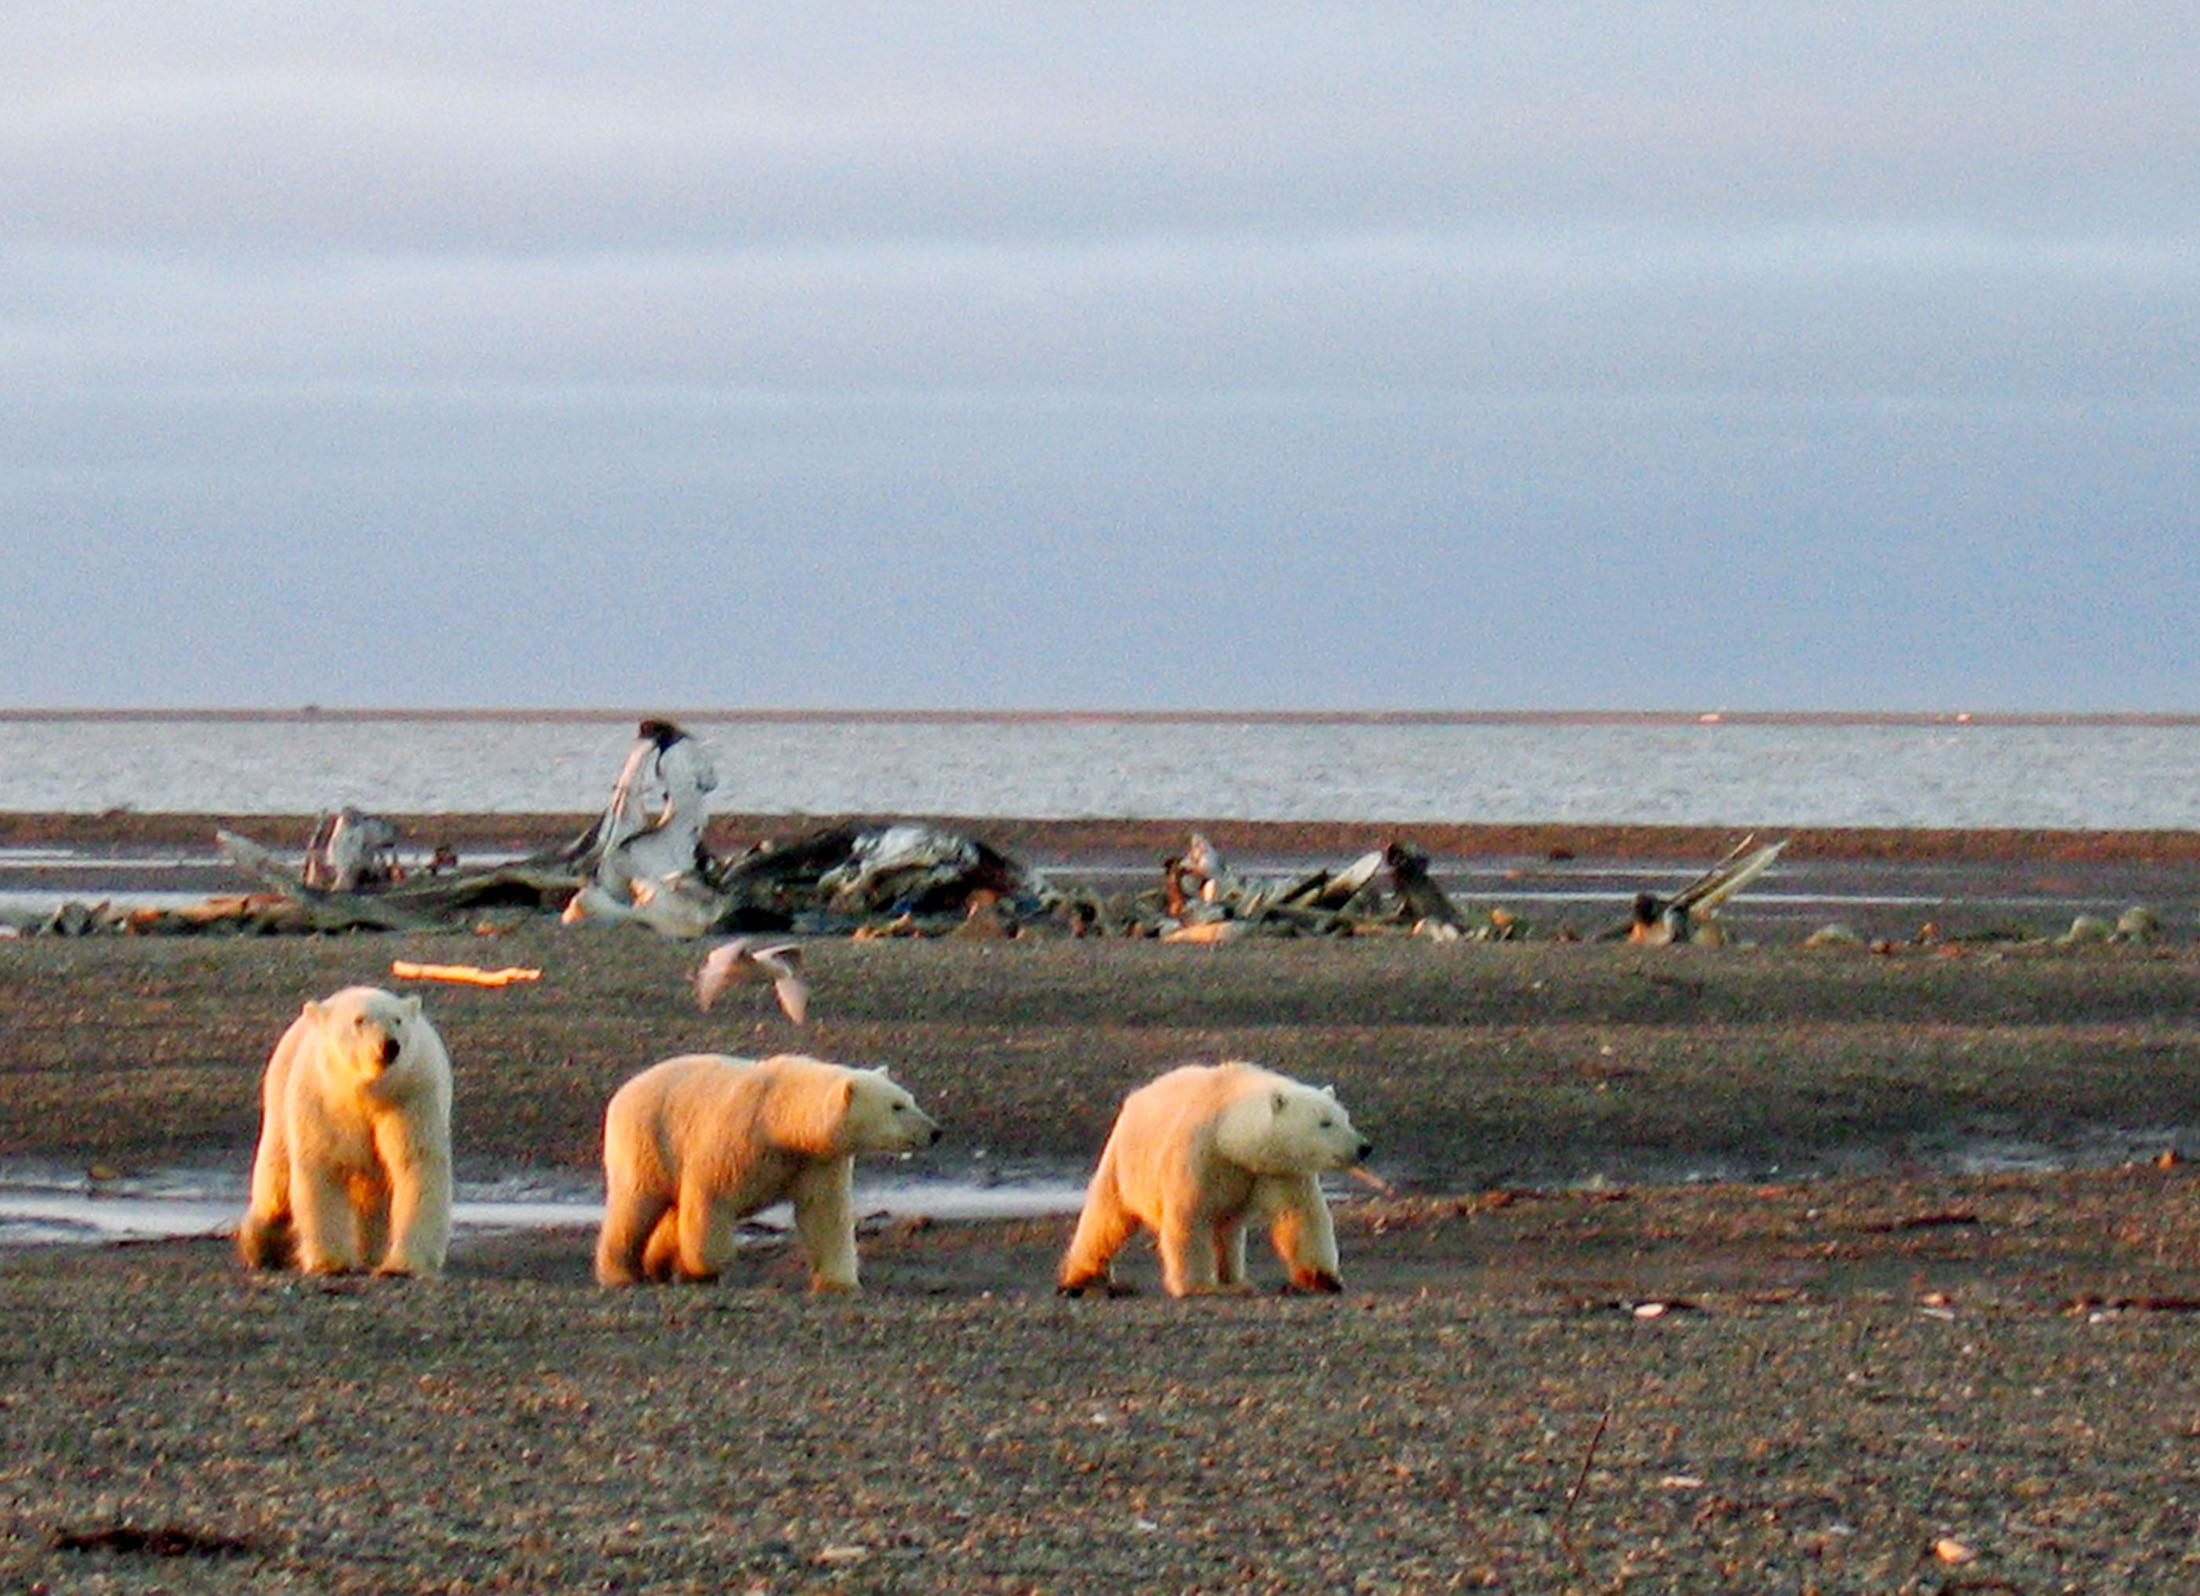 Polar bears are seen within the 1002 Area of the Arctic National Wildlife Refuge